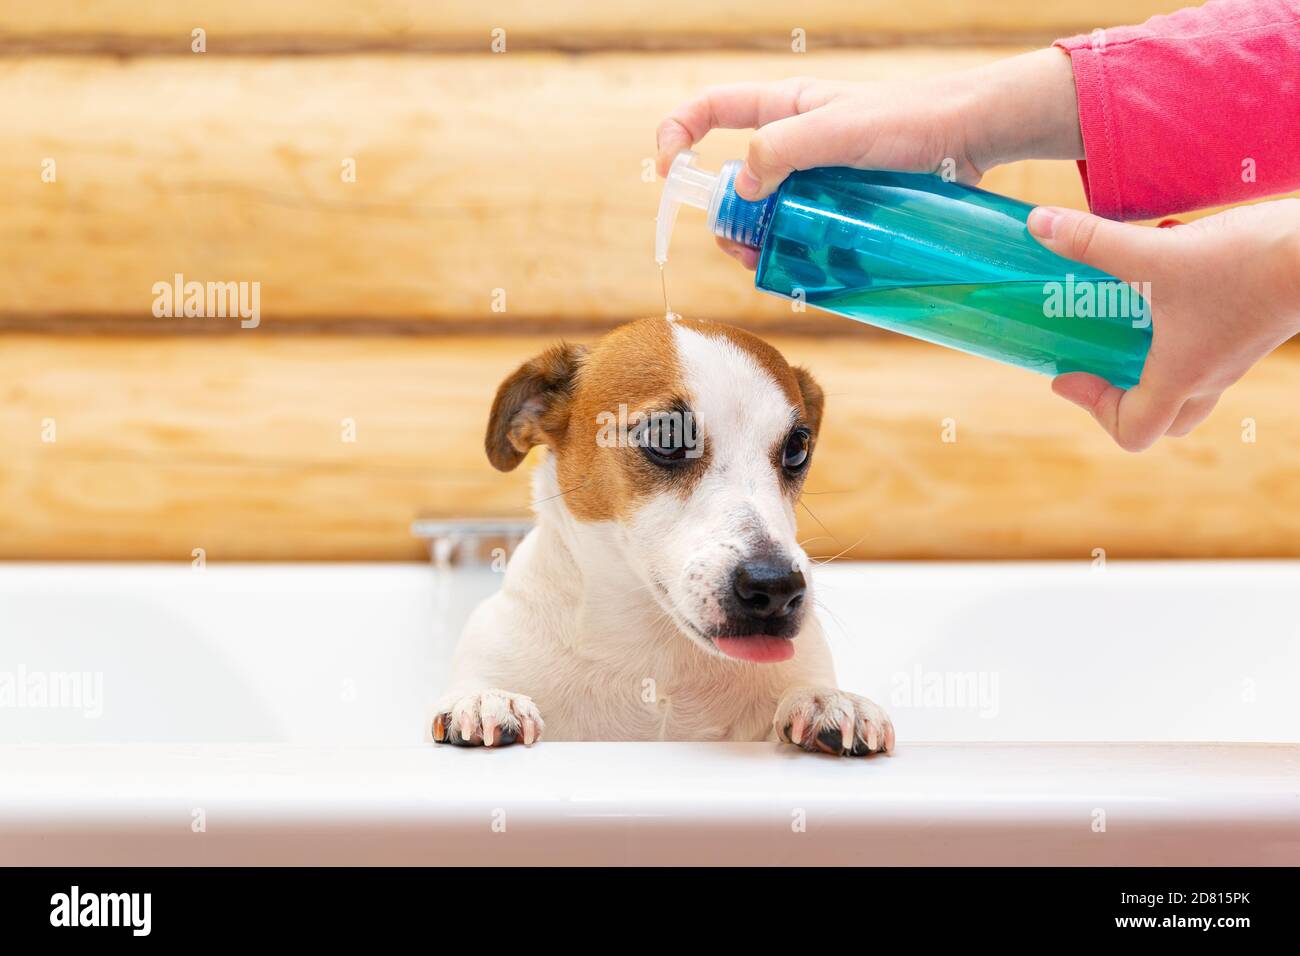 A child washes his dog Jack Russell Terrier with shampoo or soap in the bathroom. Taking care of the health of pets. Prevention of fleas and parasites Stock Photo